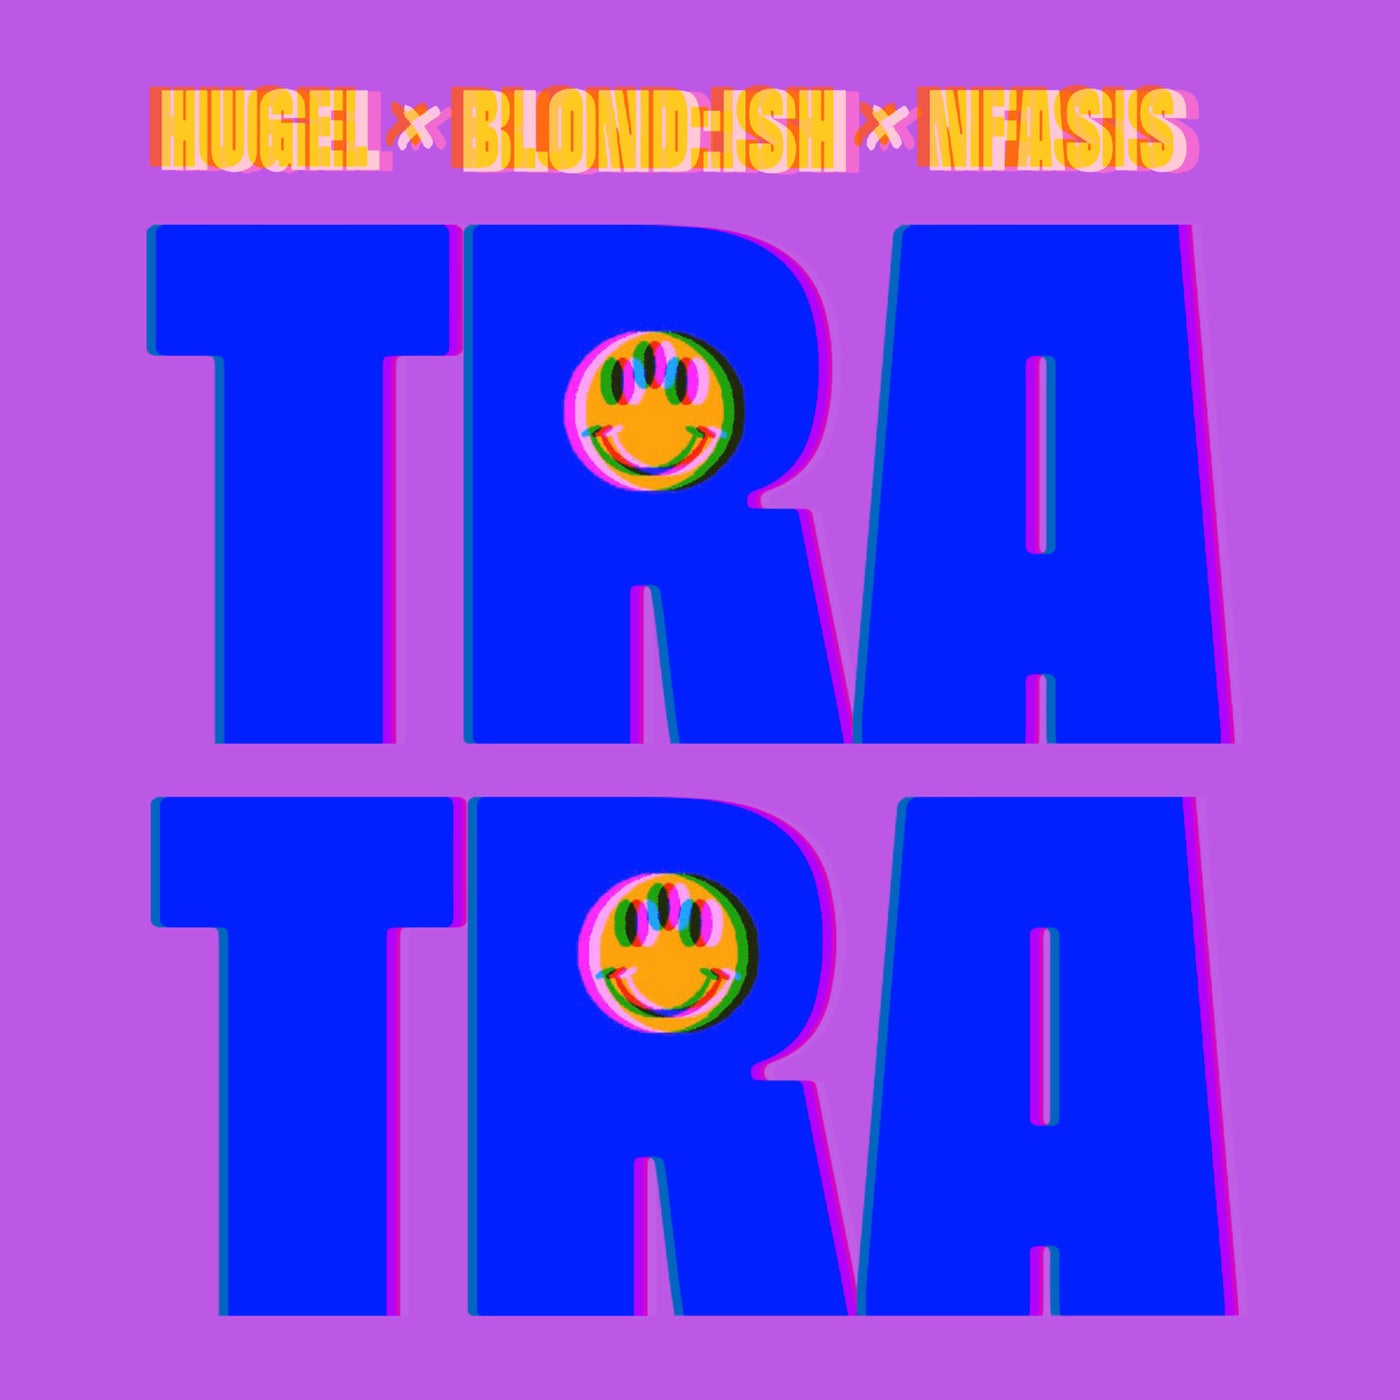 Tra Tra By Hugel Blondish And Nfasis On Beatsource